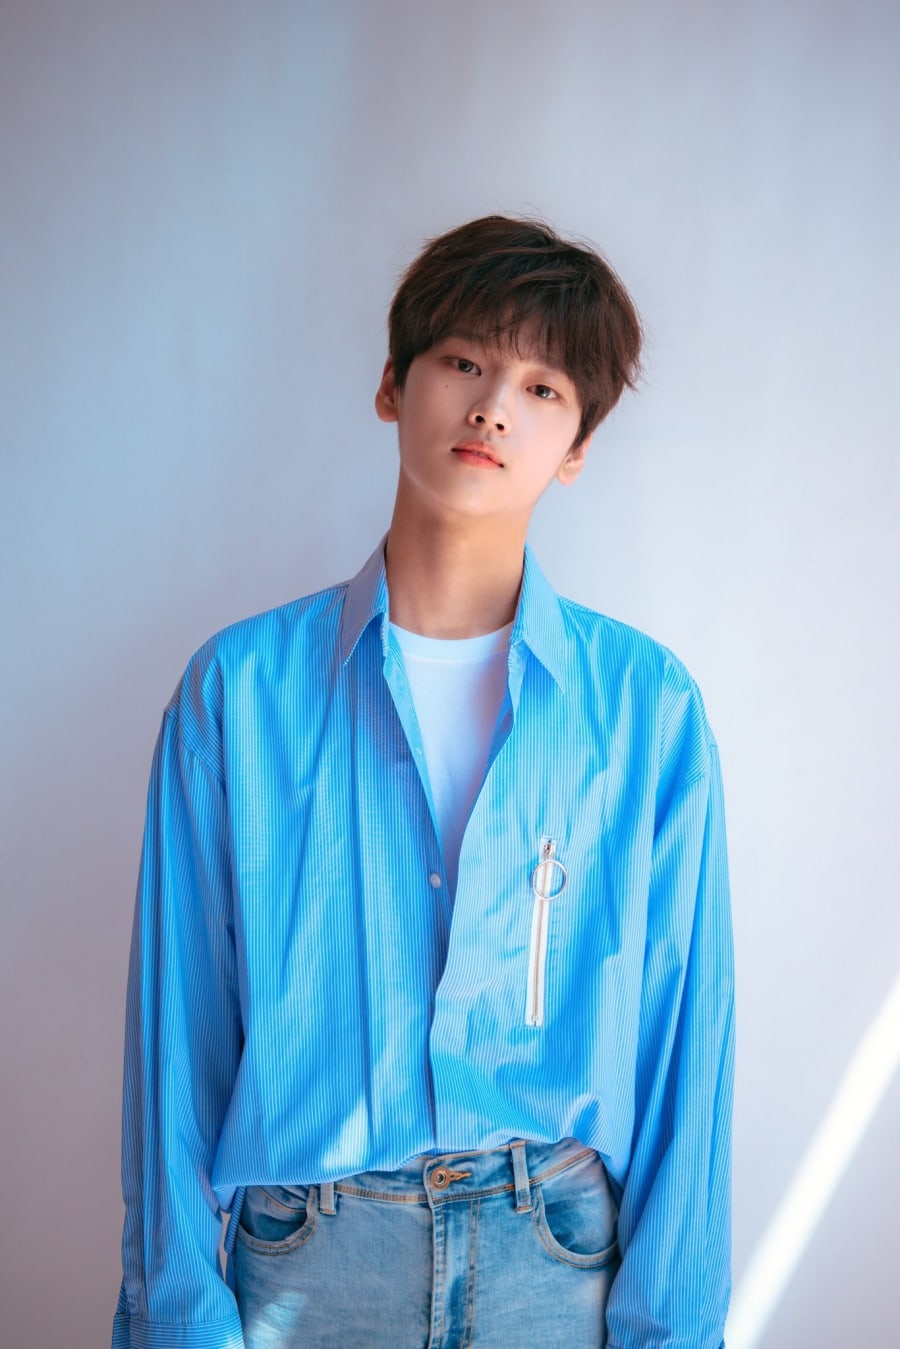 Kang Seok Hwa Talks About Being A Former JYP And YG Trainee + How X1's Kim Yo Han Convinced Him To Sign With His Agency After “Produce X 101”